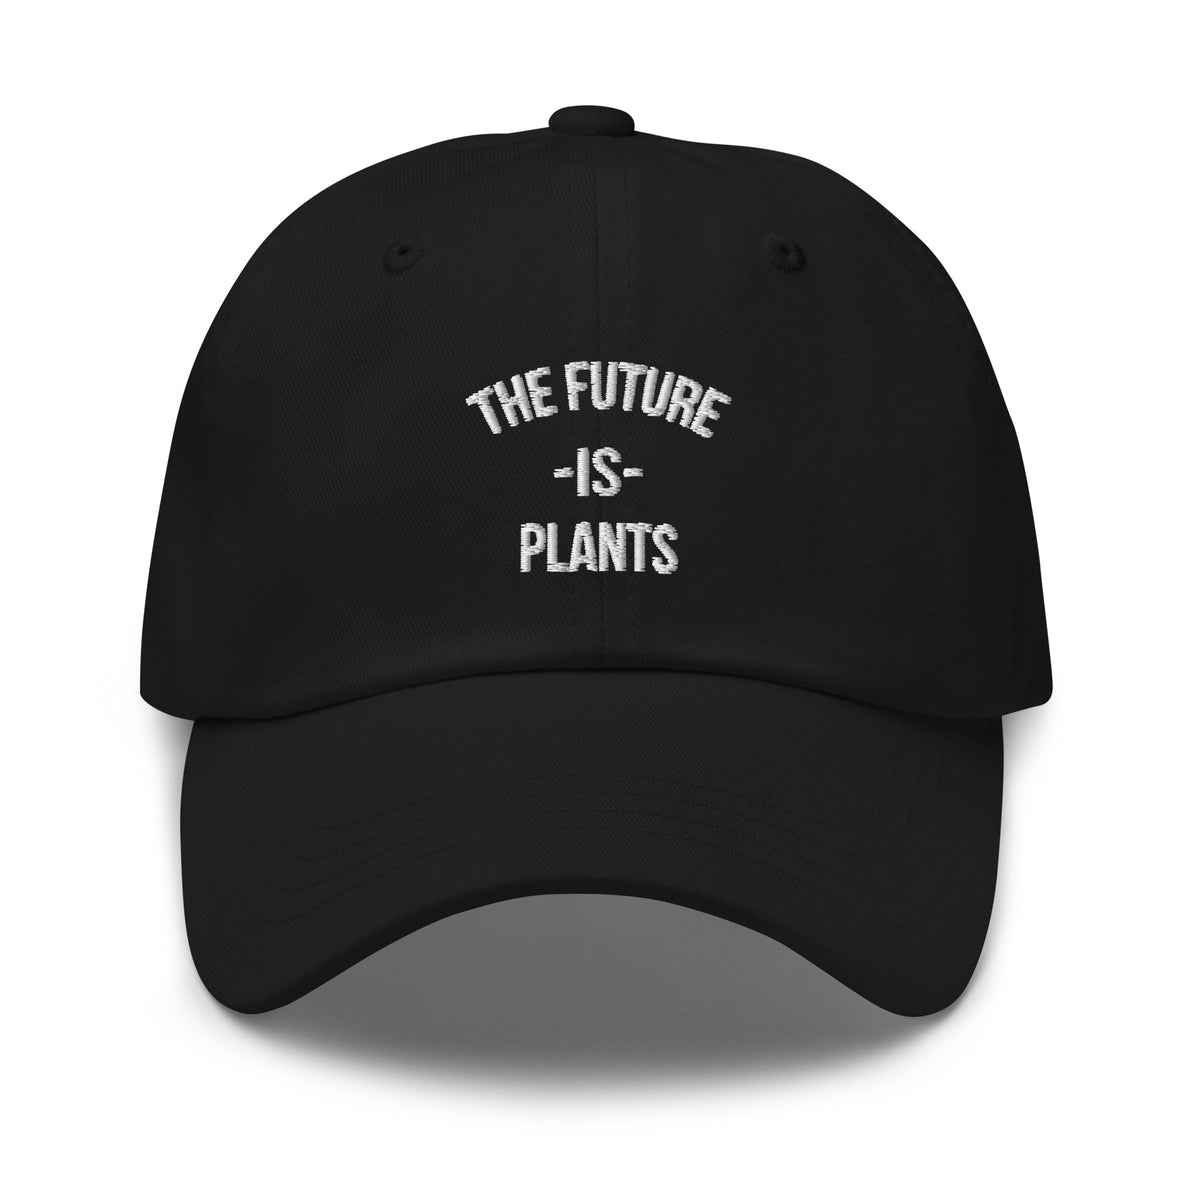 THE FUTURE IS PLANTS Dad hat